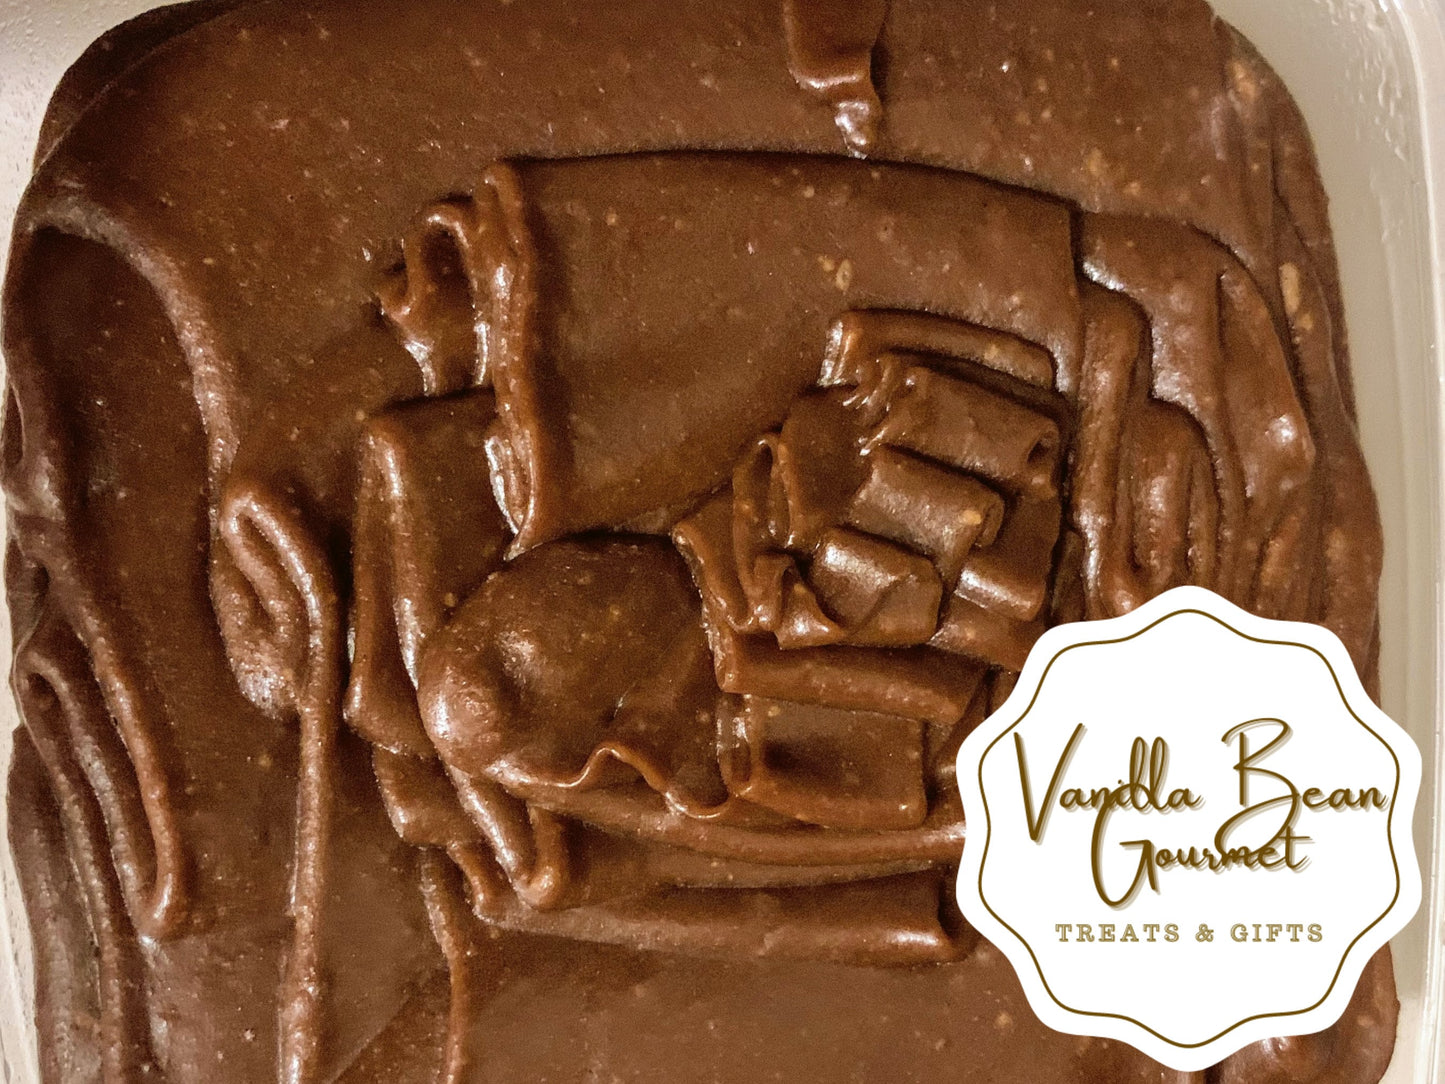 New! Chocolate Fudge candy, Handmade Old Fashioned cocoa fudge,  1 1/2 pound pan of fudge. Makes a great gift, Flavor variety Choices. Chocolate gifts